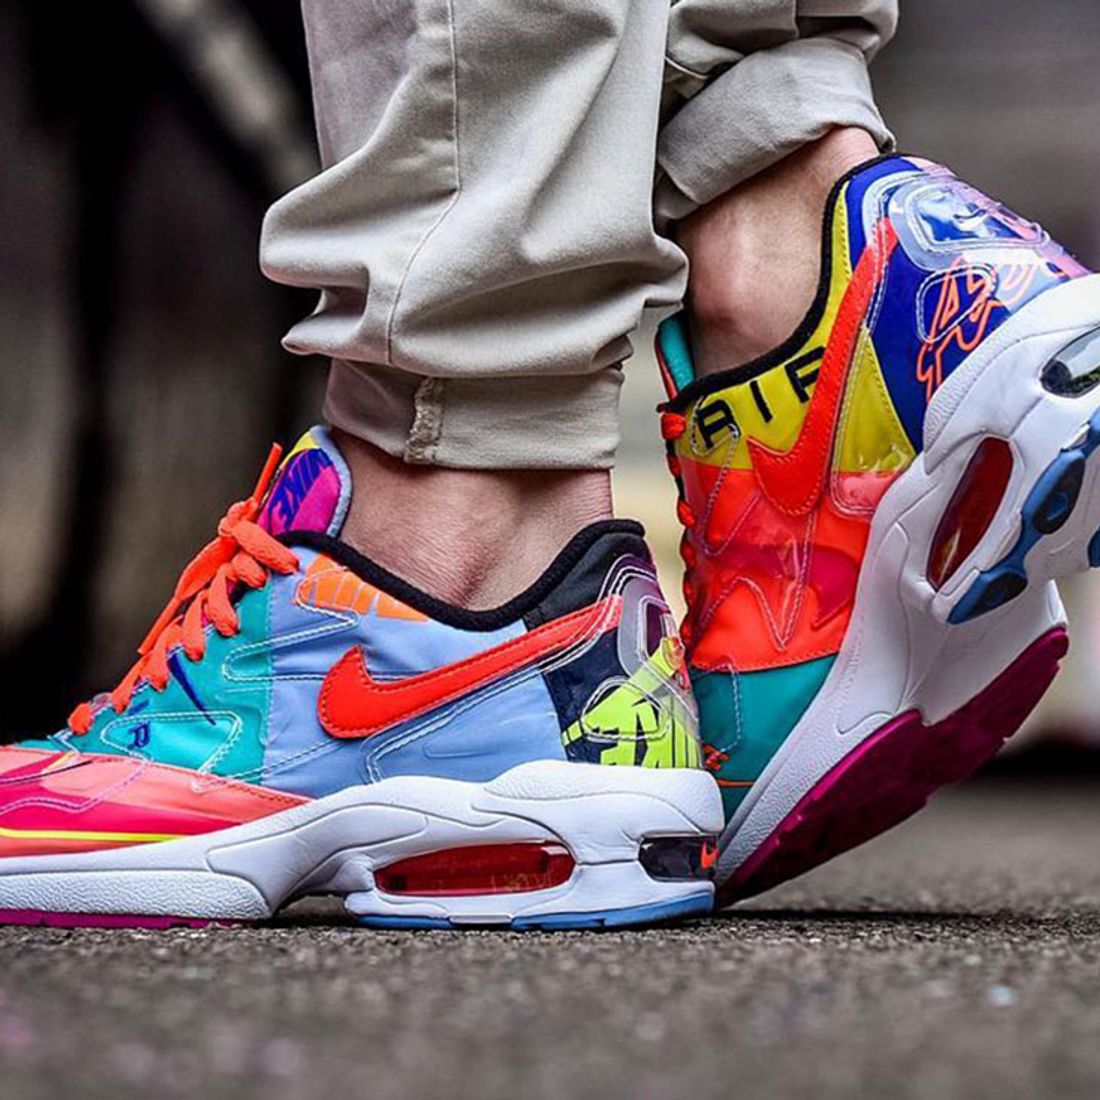 Here's Are Styling the atmos Nike Air Max2 Light Sneaker Freaker